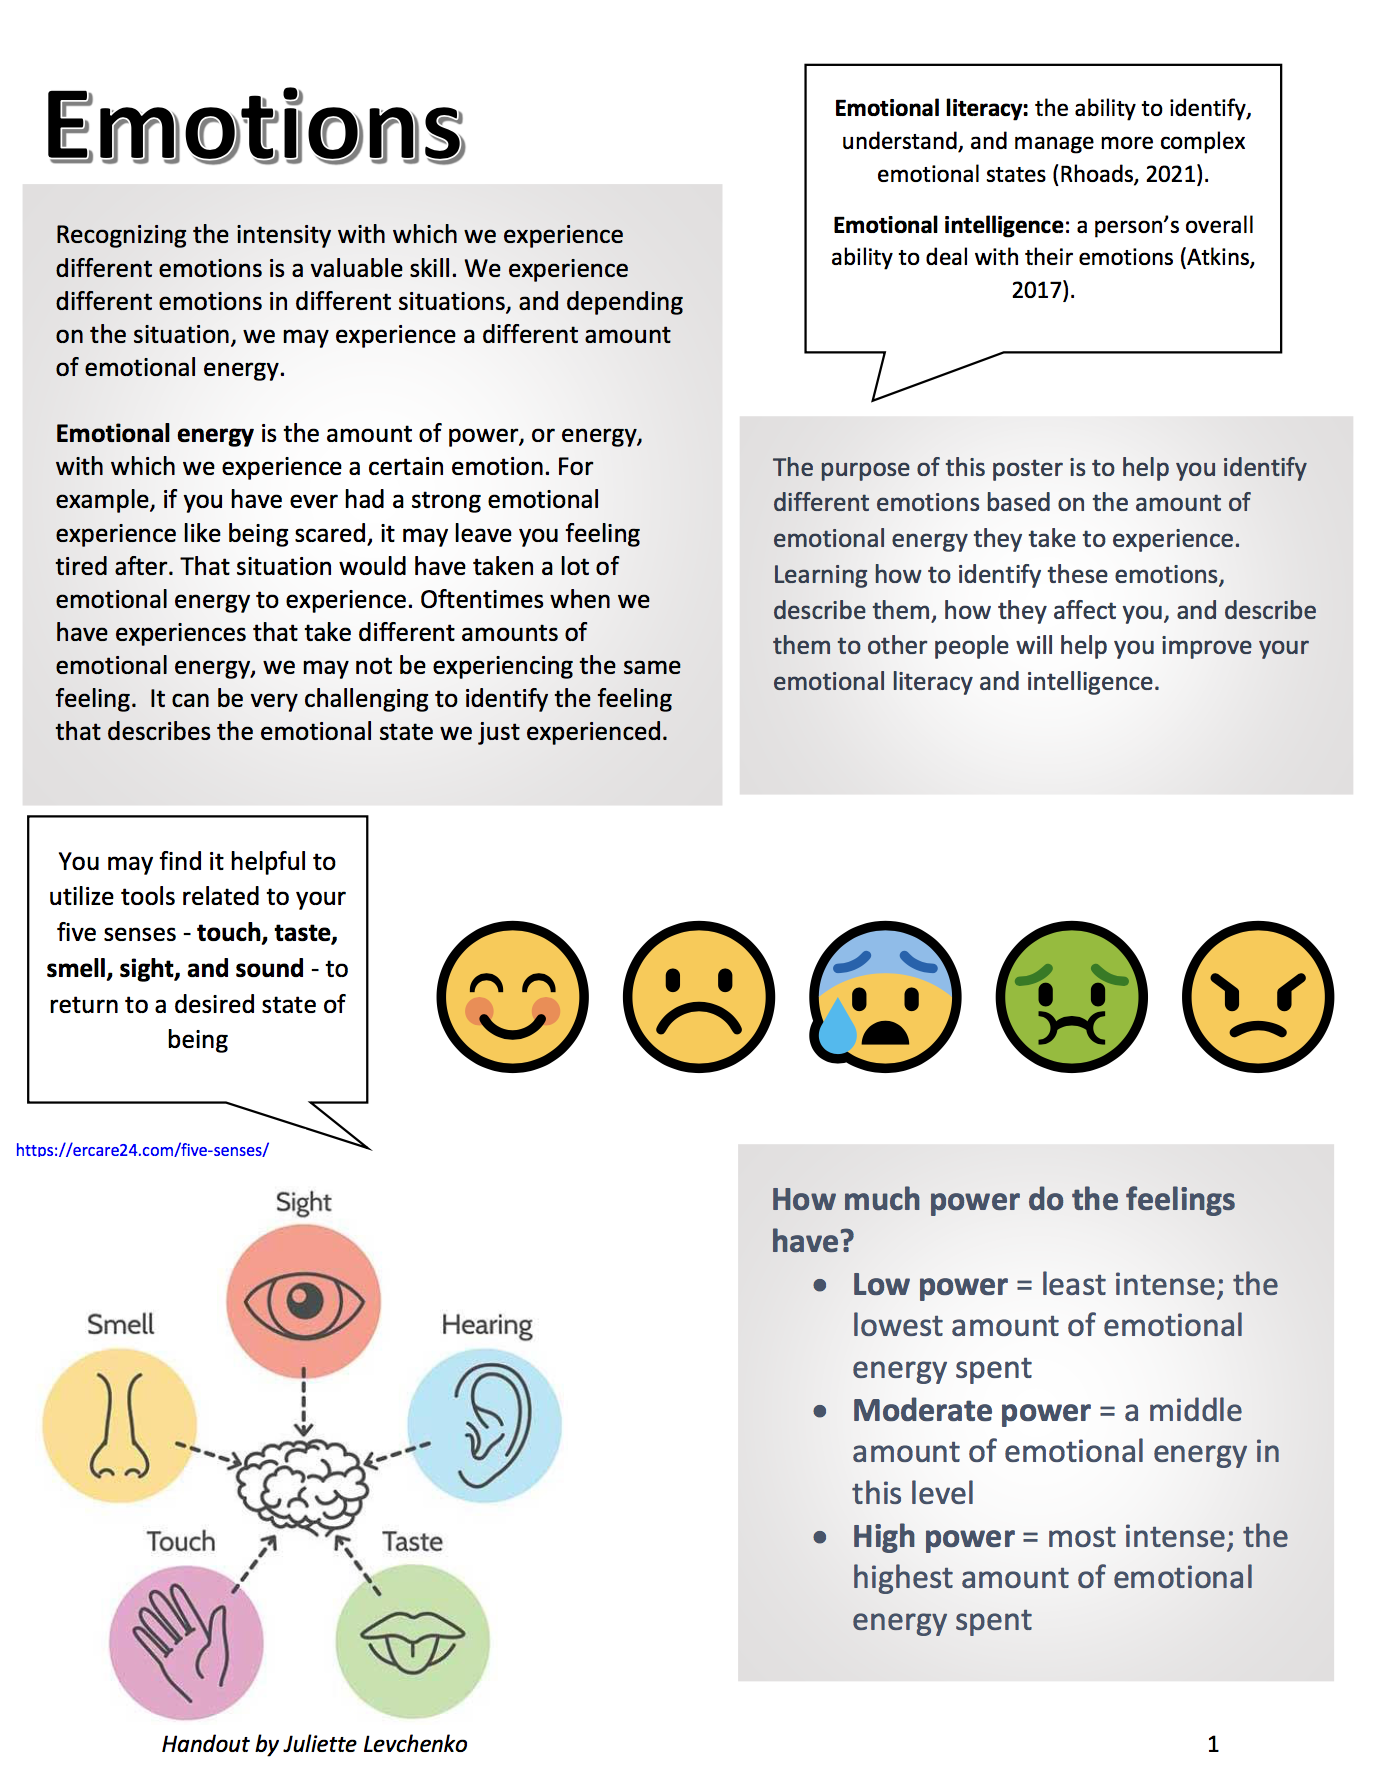 jmr-counseling-emotional-literacy-poster-and-handout